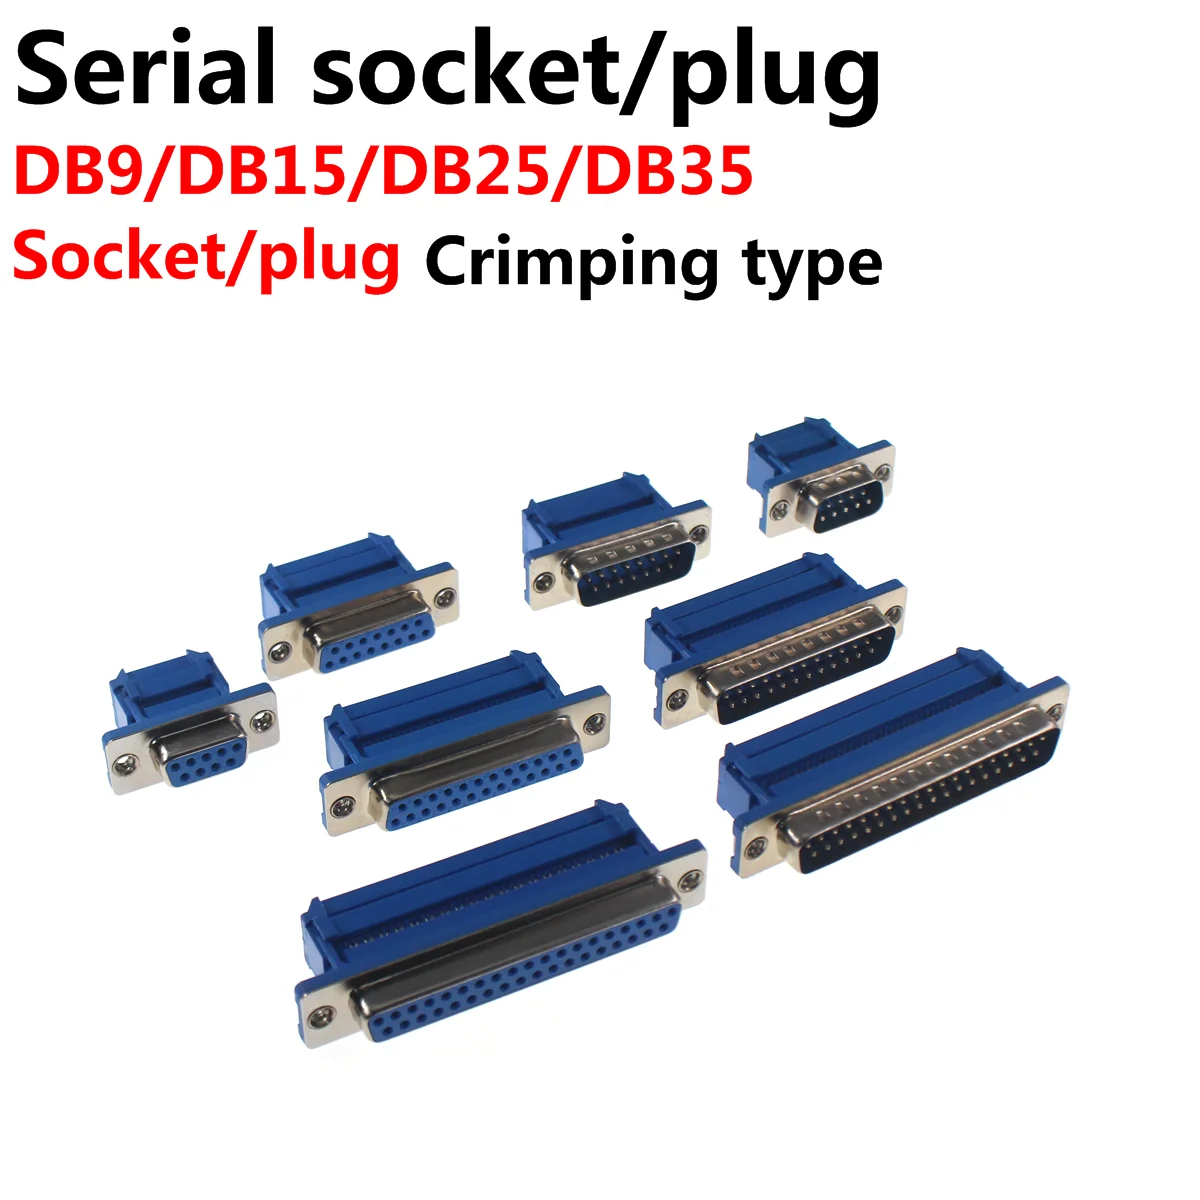 5PCS DB9 DB15 DB25 DB37 DIDC9/DIDC15/DIDC25/DIDC37 Male Female Plug Serial Port Connector Idc Crimp Type D-SUB Rs232 Adapter 5pcs pack oem dock connector charging port for xiaomi redmi note 5 note 5 pro